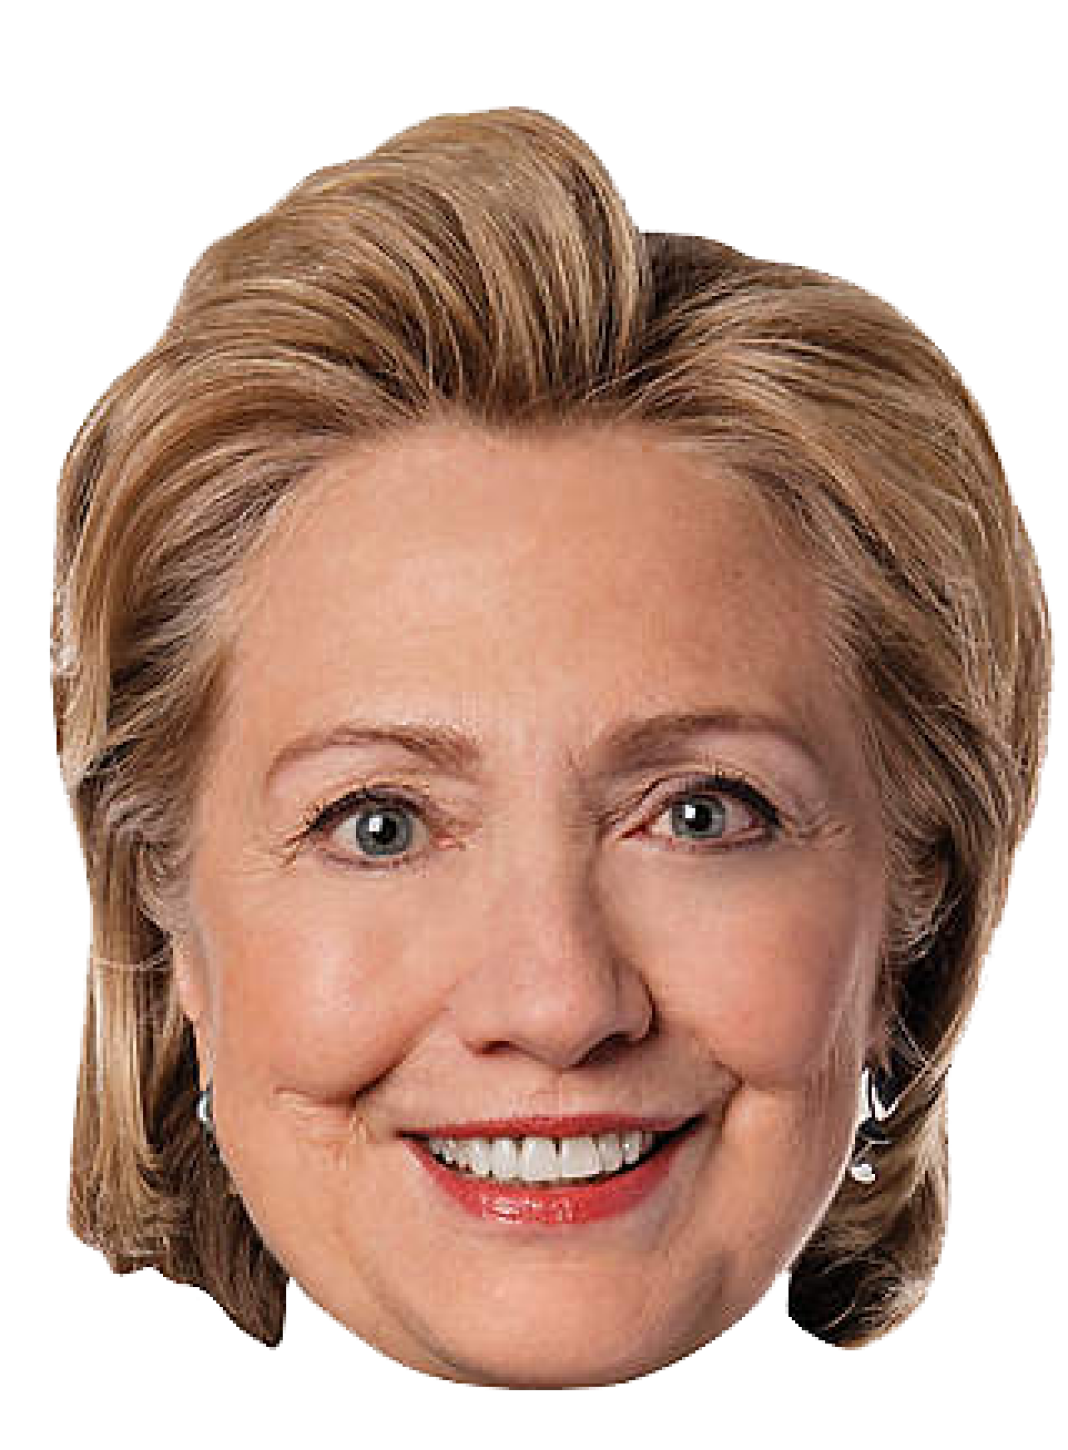 Hillary Clinton Face Free HD Image PNG Image